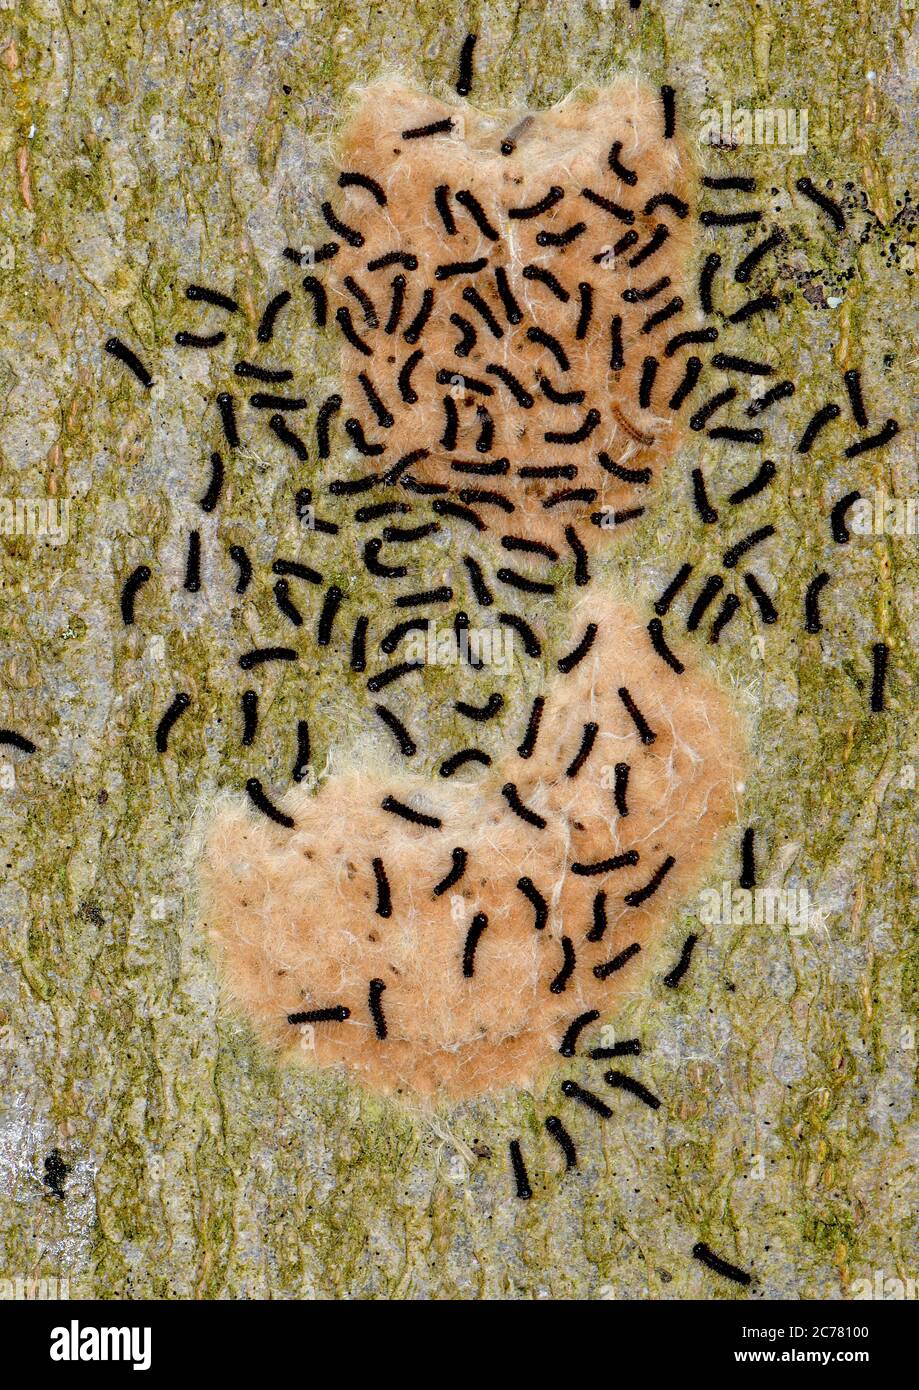 Gypsy Moth (Lymantria dispar). The small black caterpillars hatch from egg packets on the bark of a beech tree in spring at the beginning of the leaf shoot and then climb to the leaf branches. Germany Stock Photo